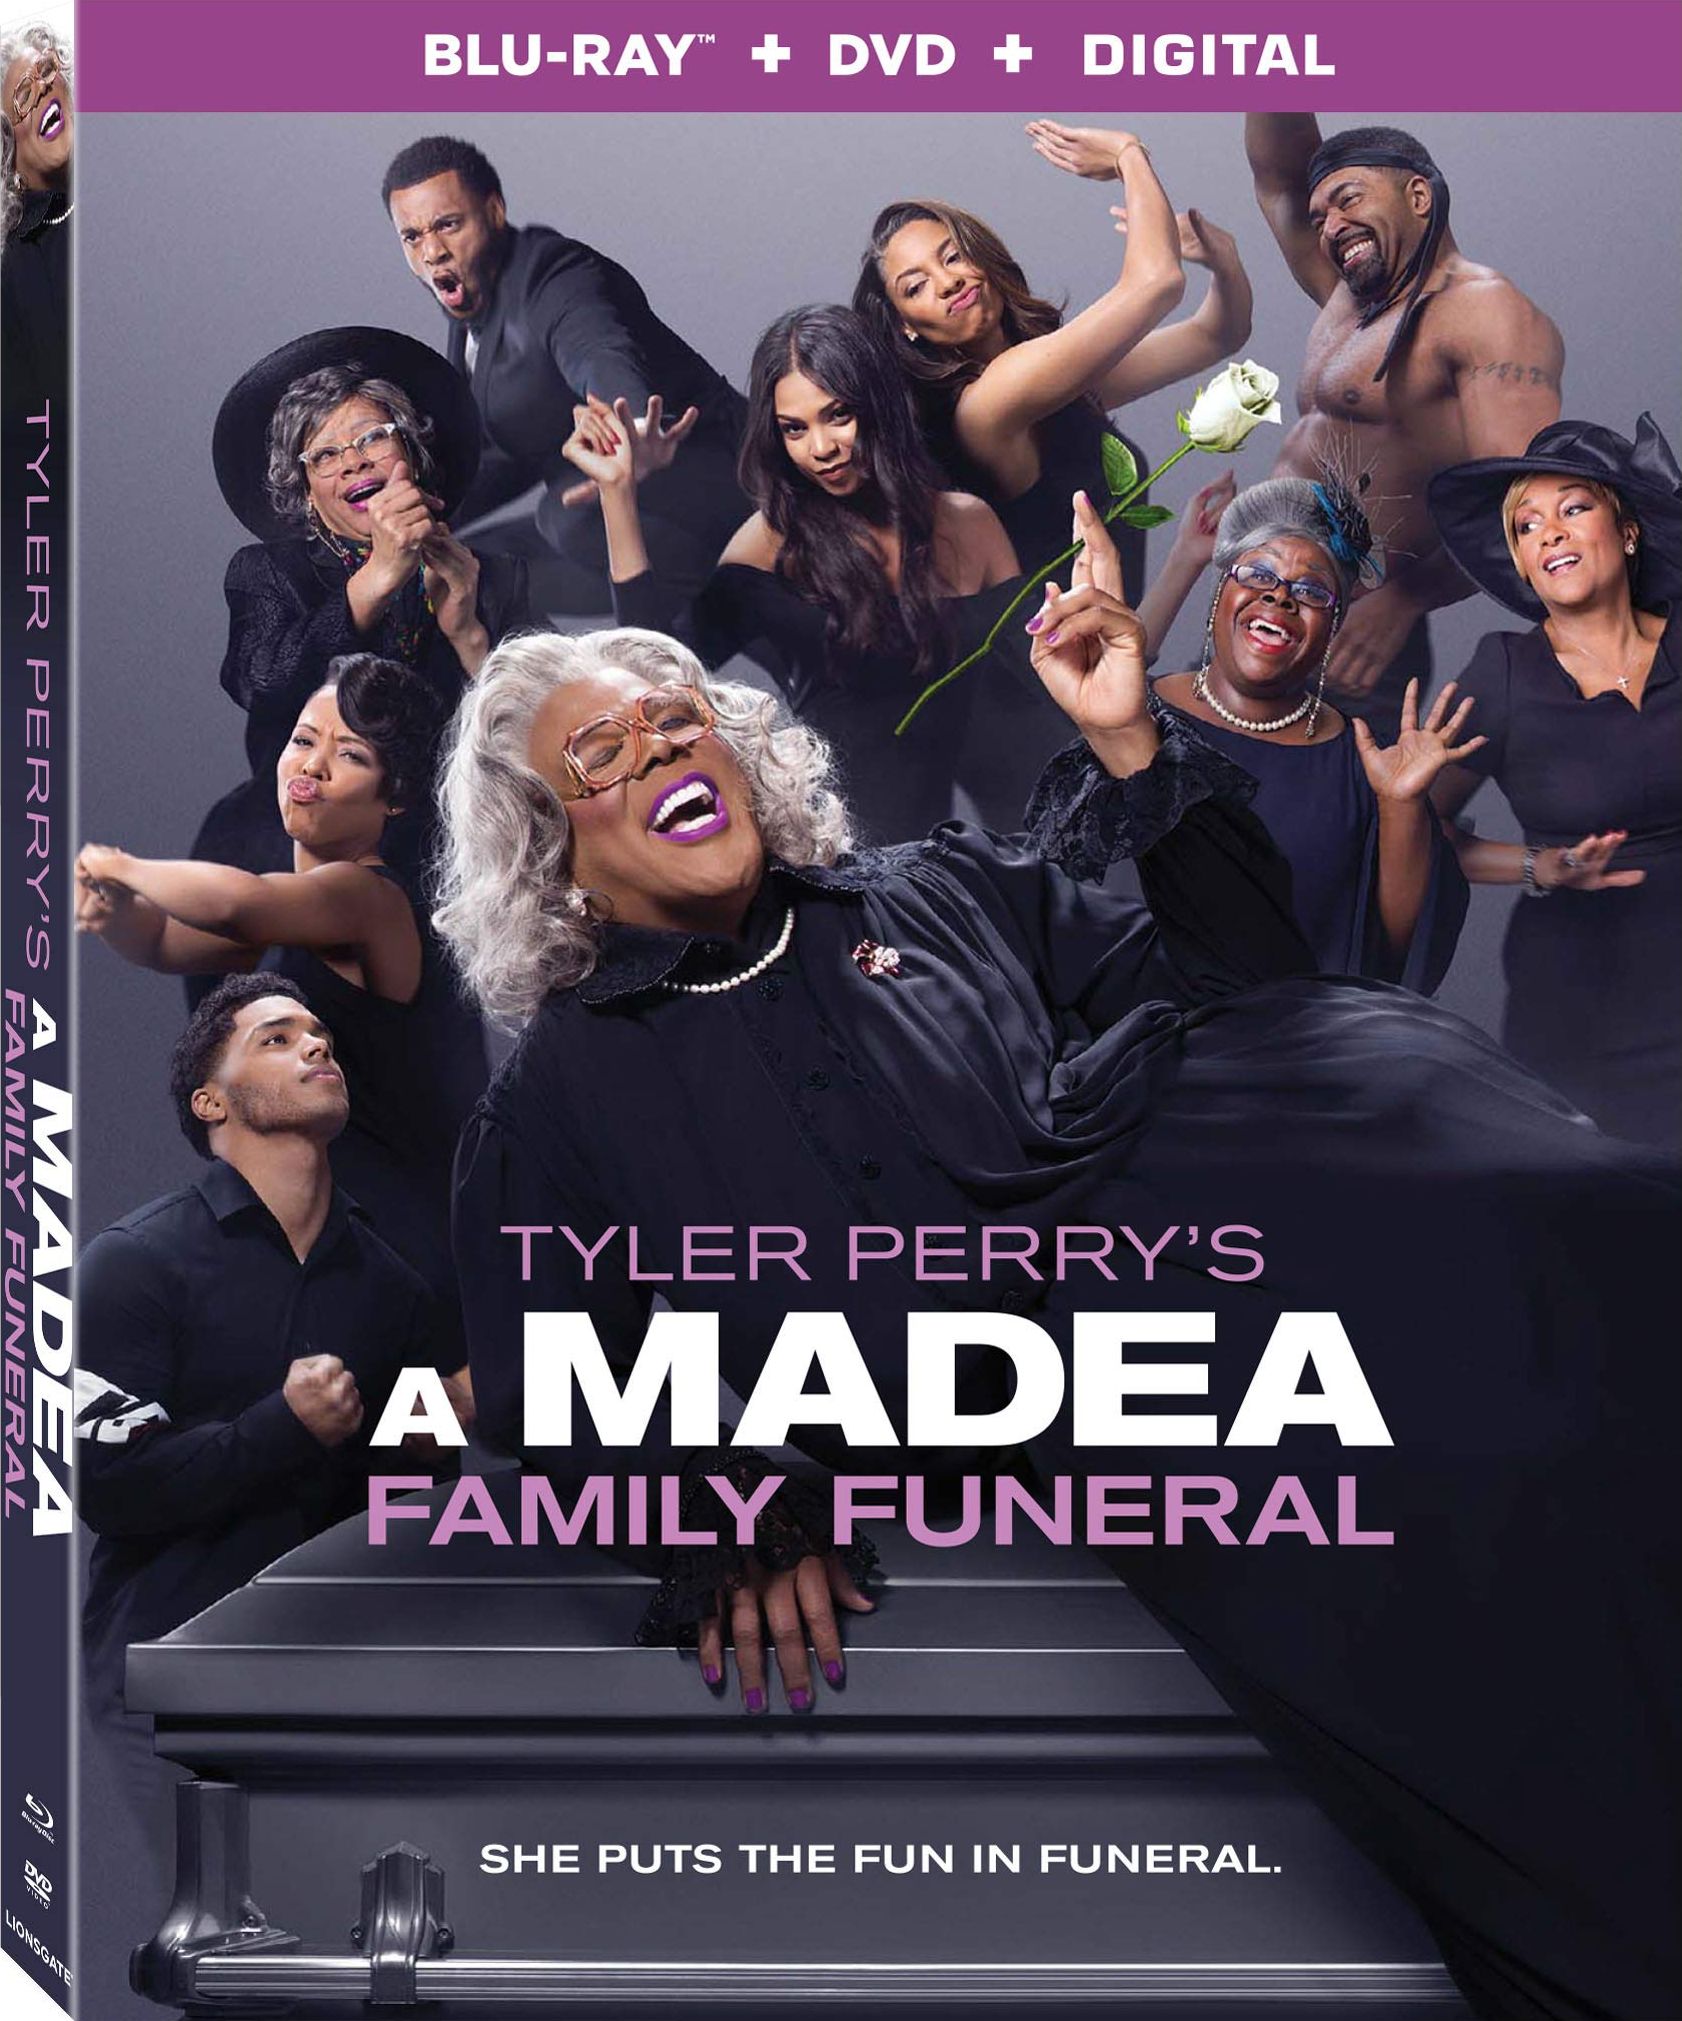 A Madea Family Funeral DVD Release Date June 4, 2019